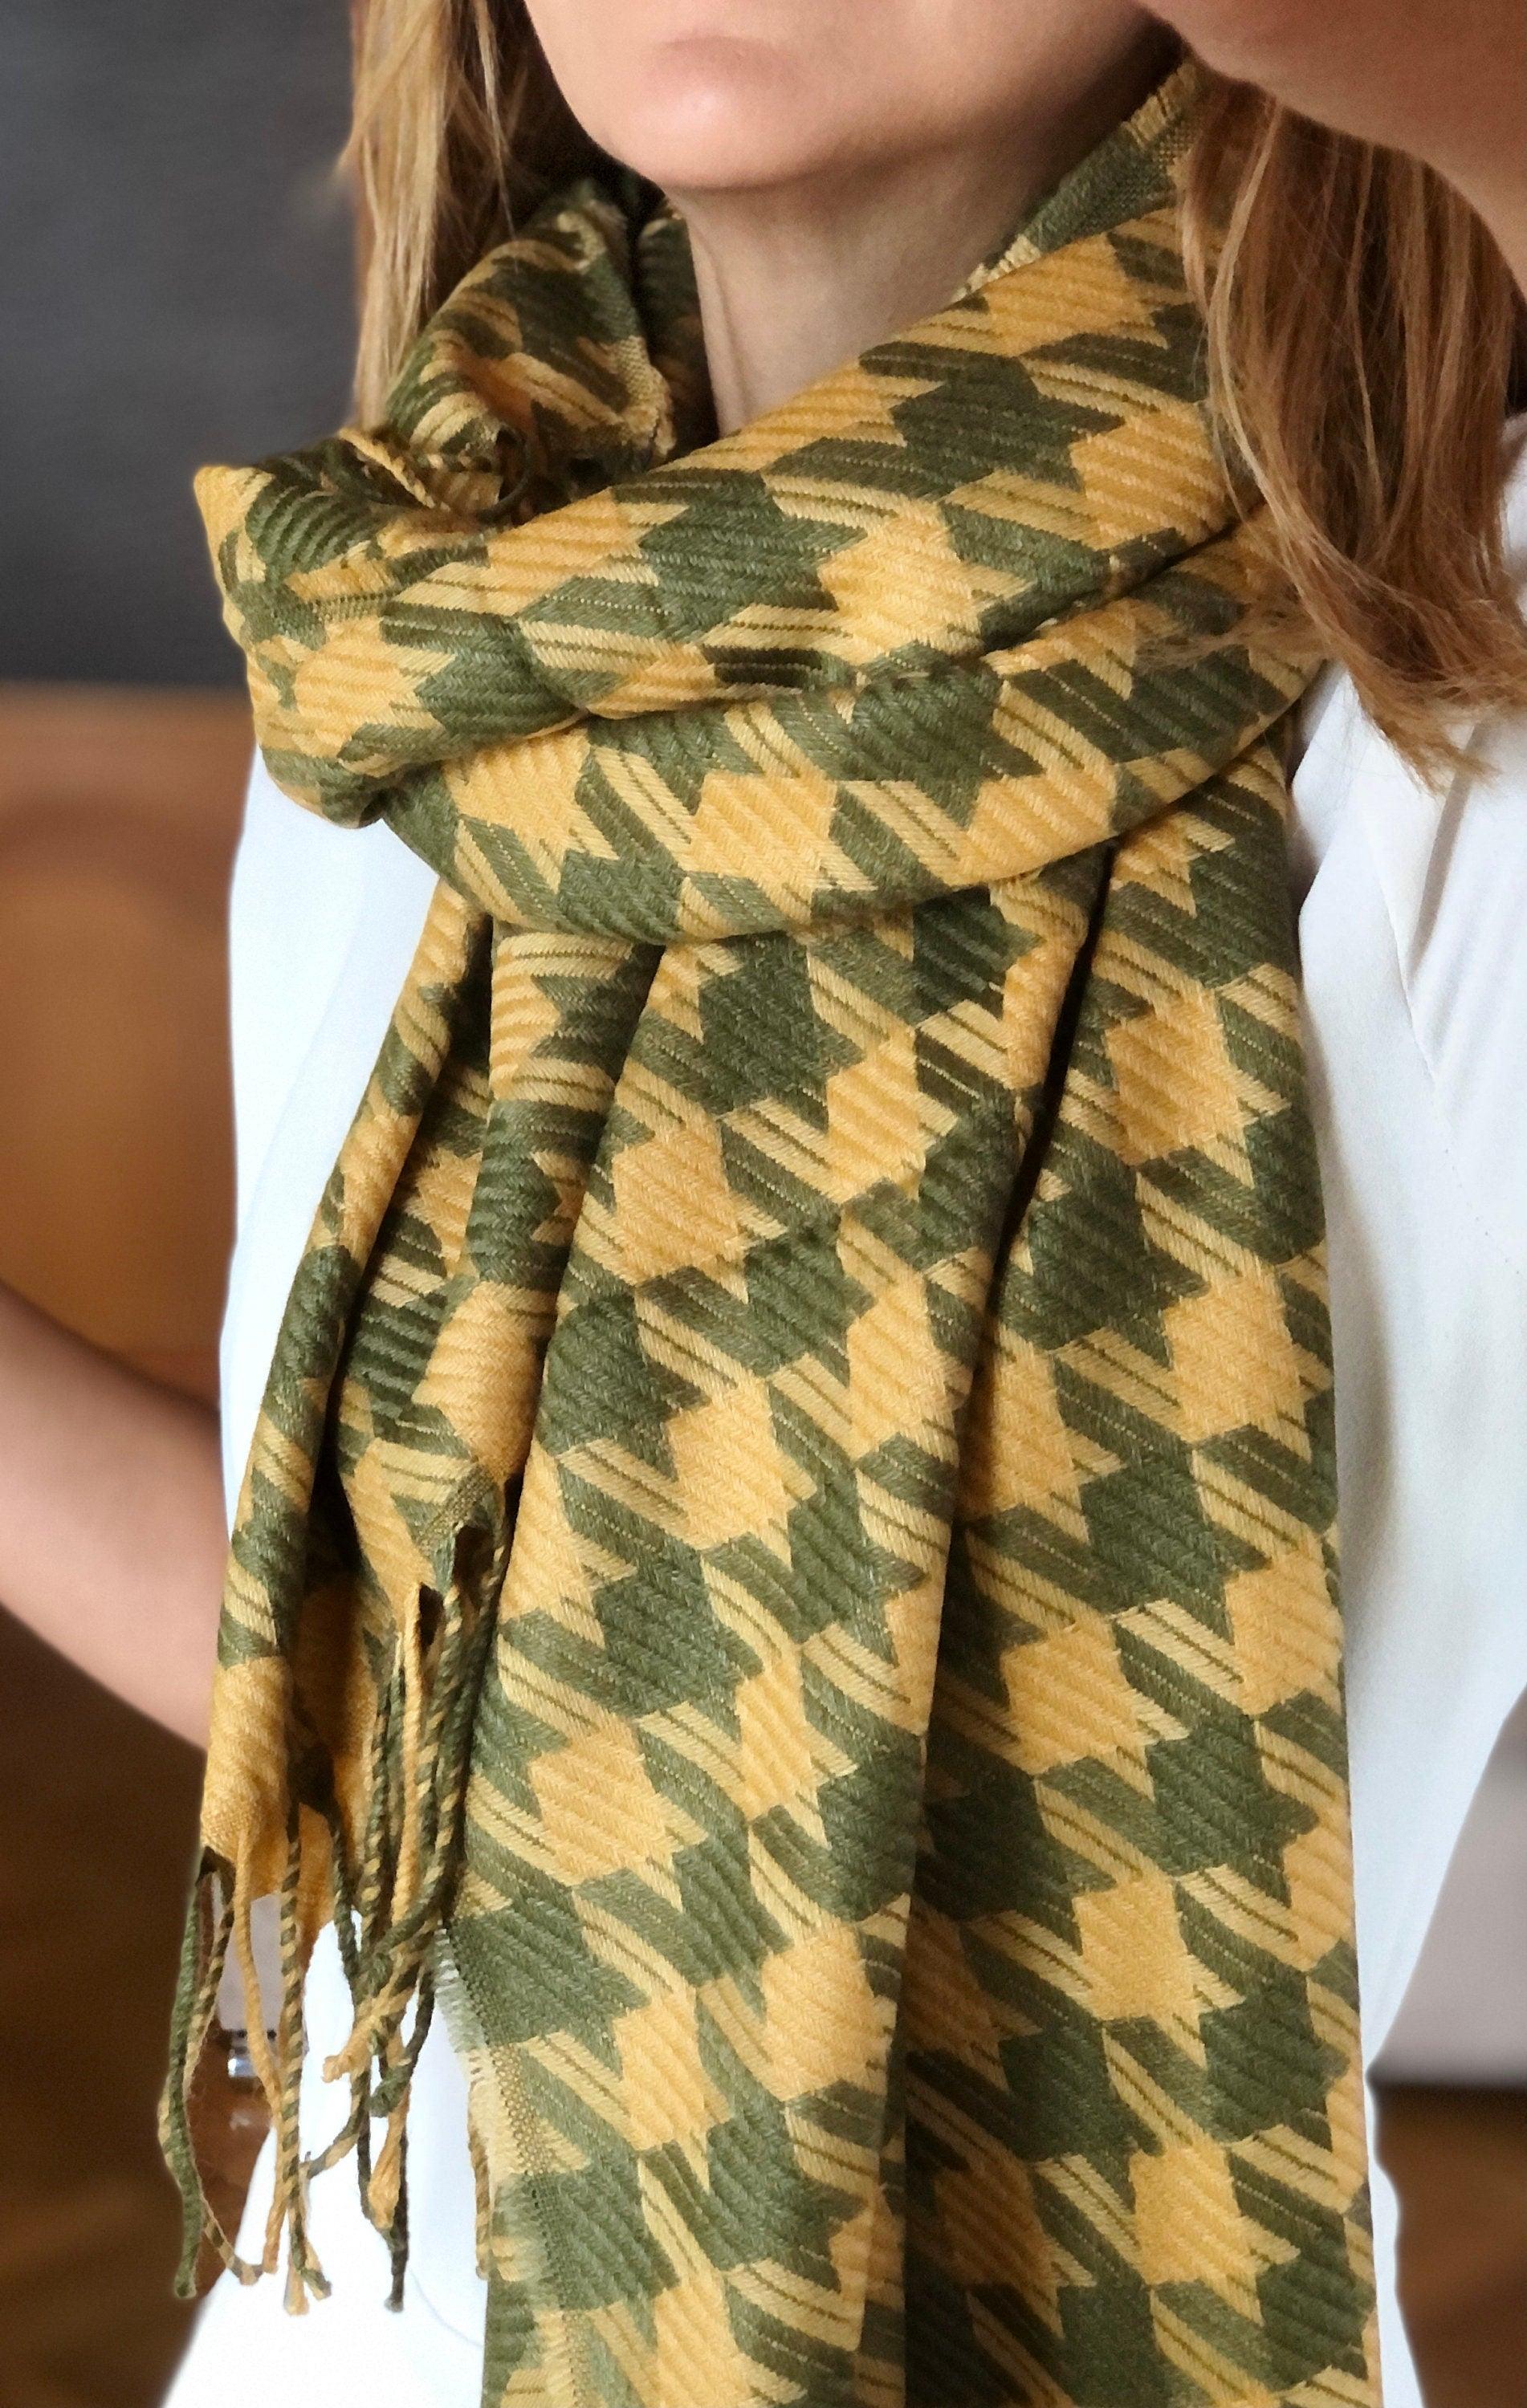 Stylish Long Wool Acrylic Cotton Pattern Shawl in Yellow Khaki Green - Travel in Style with this Warm Scarf for Women available at Moyoni Design